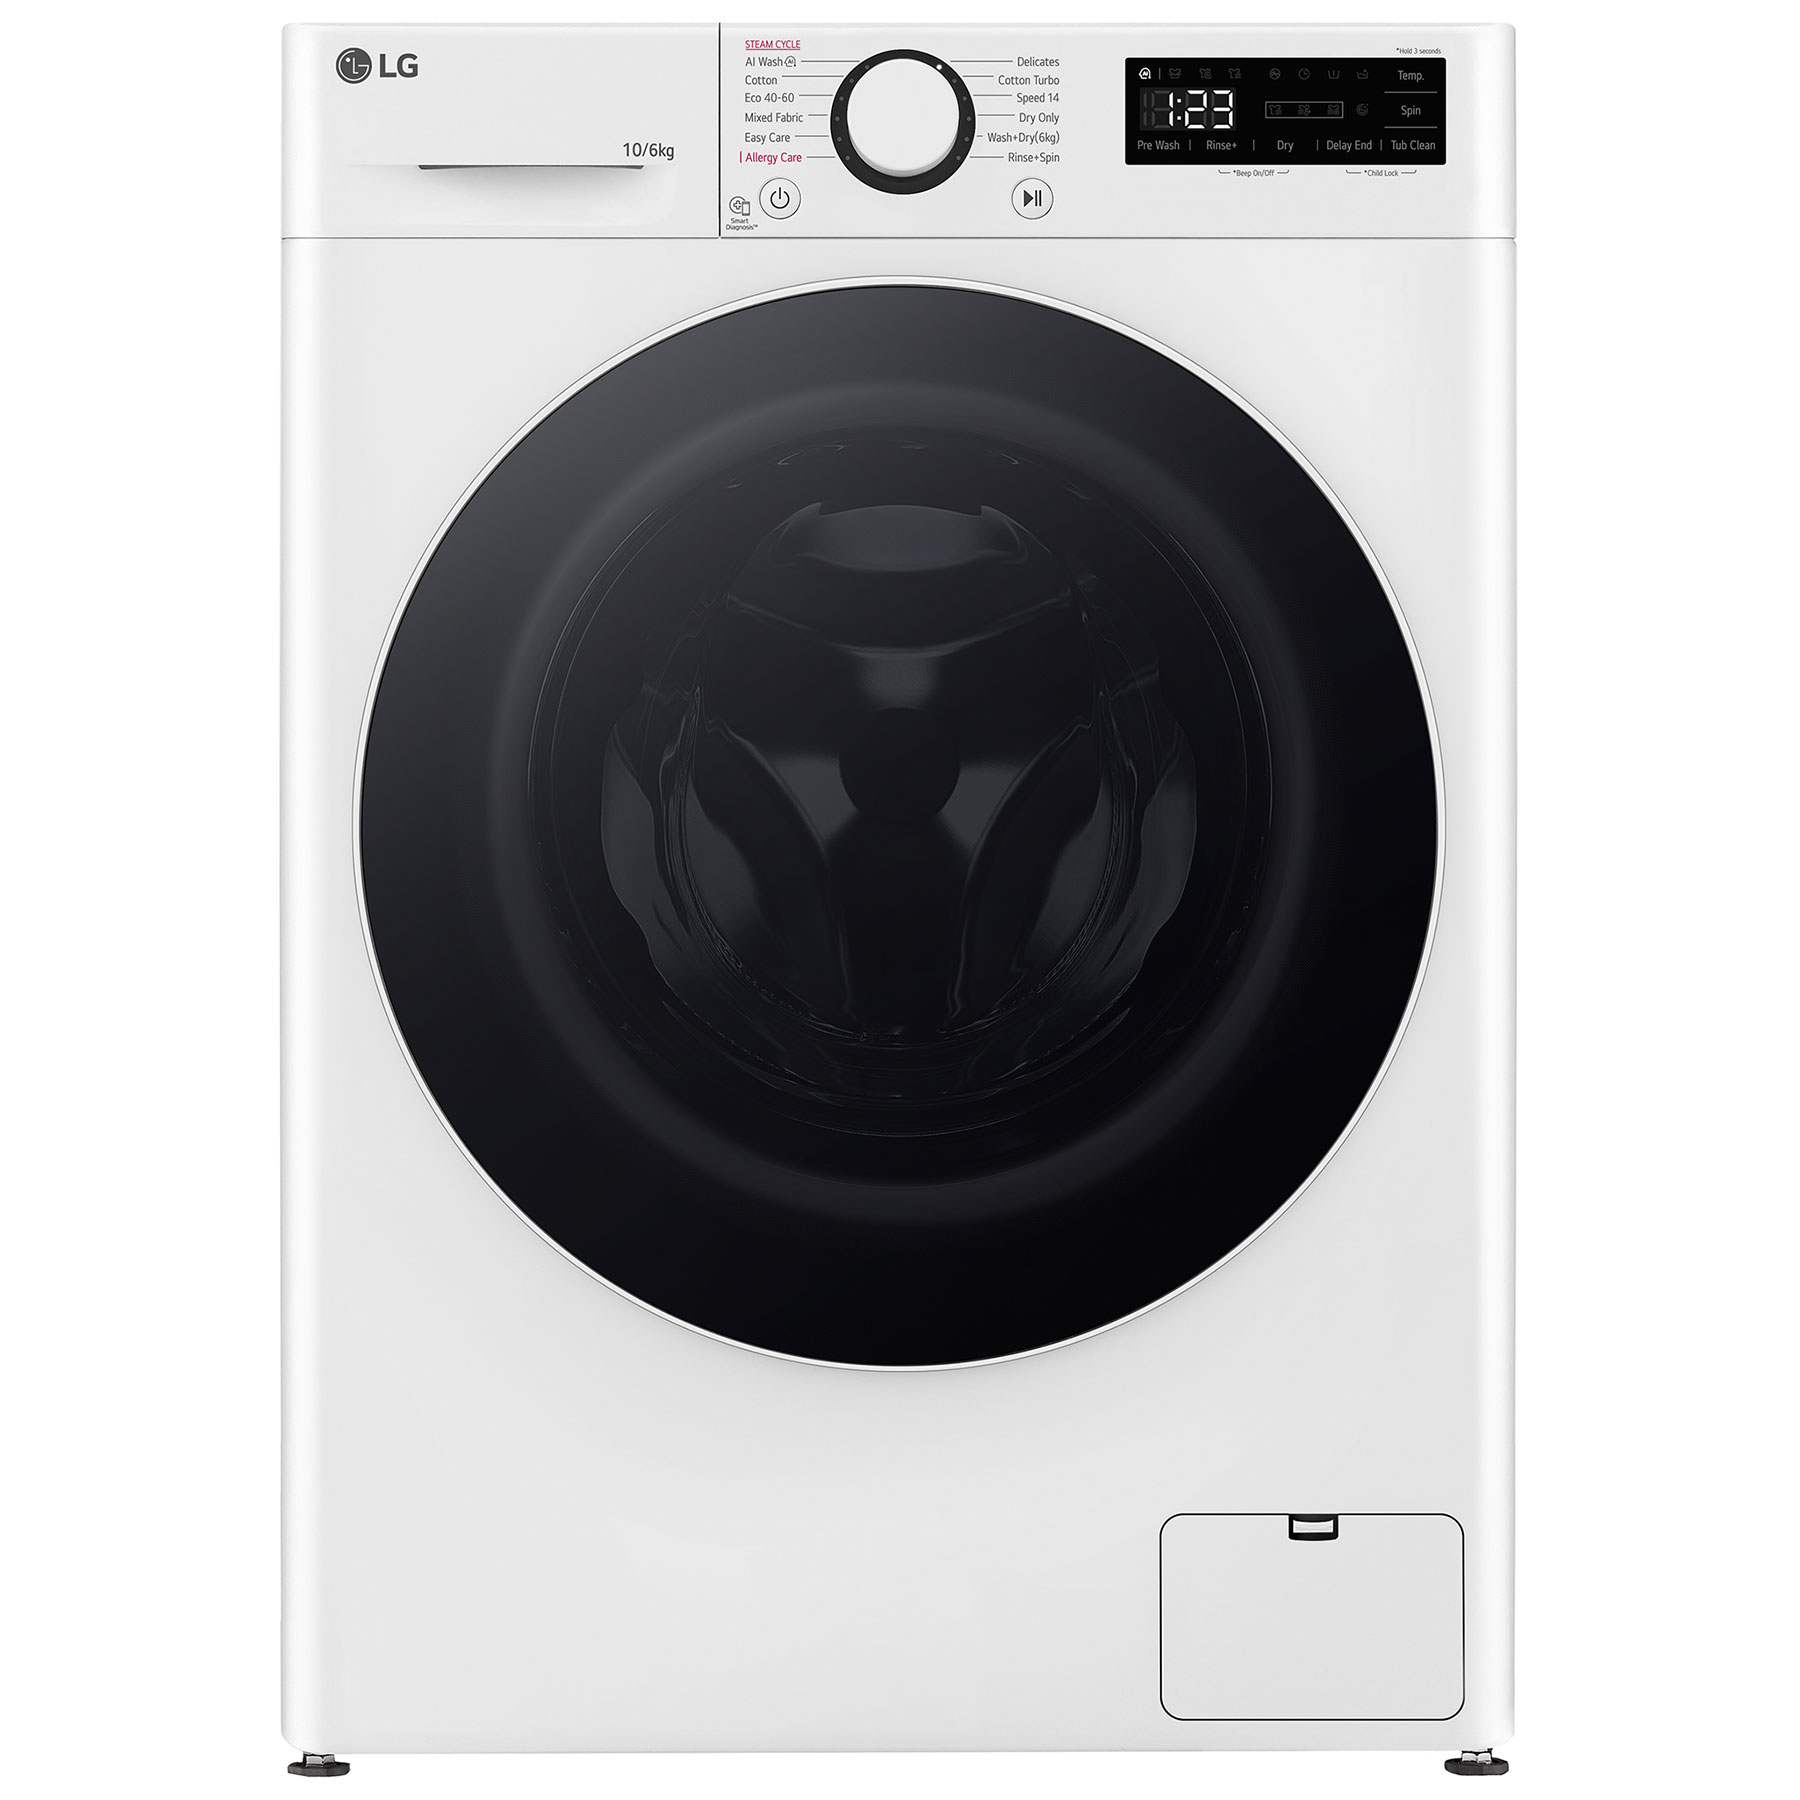 Image of LG FWY606WWLN1 Washer Dryer in White 1400rpm 10 6kg D Rated